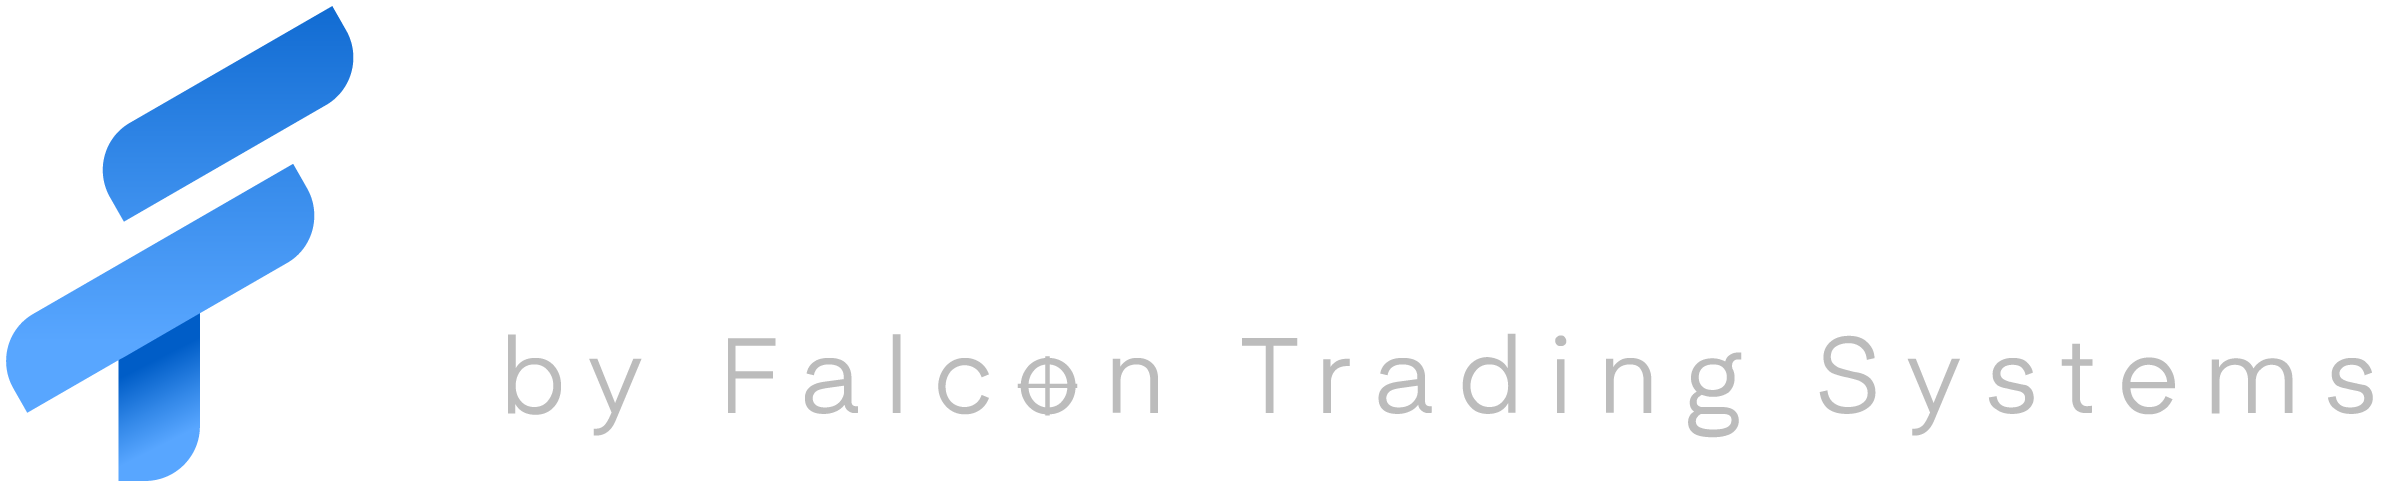 Trading Computers Knowledgebase